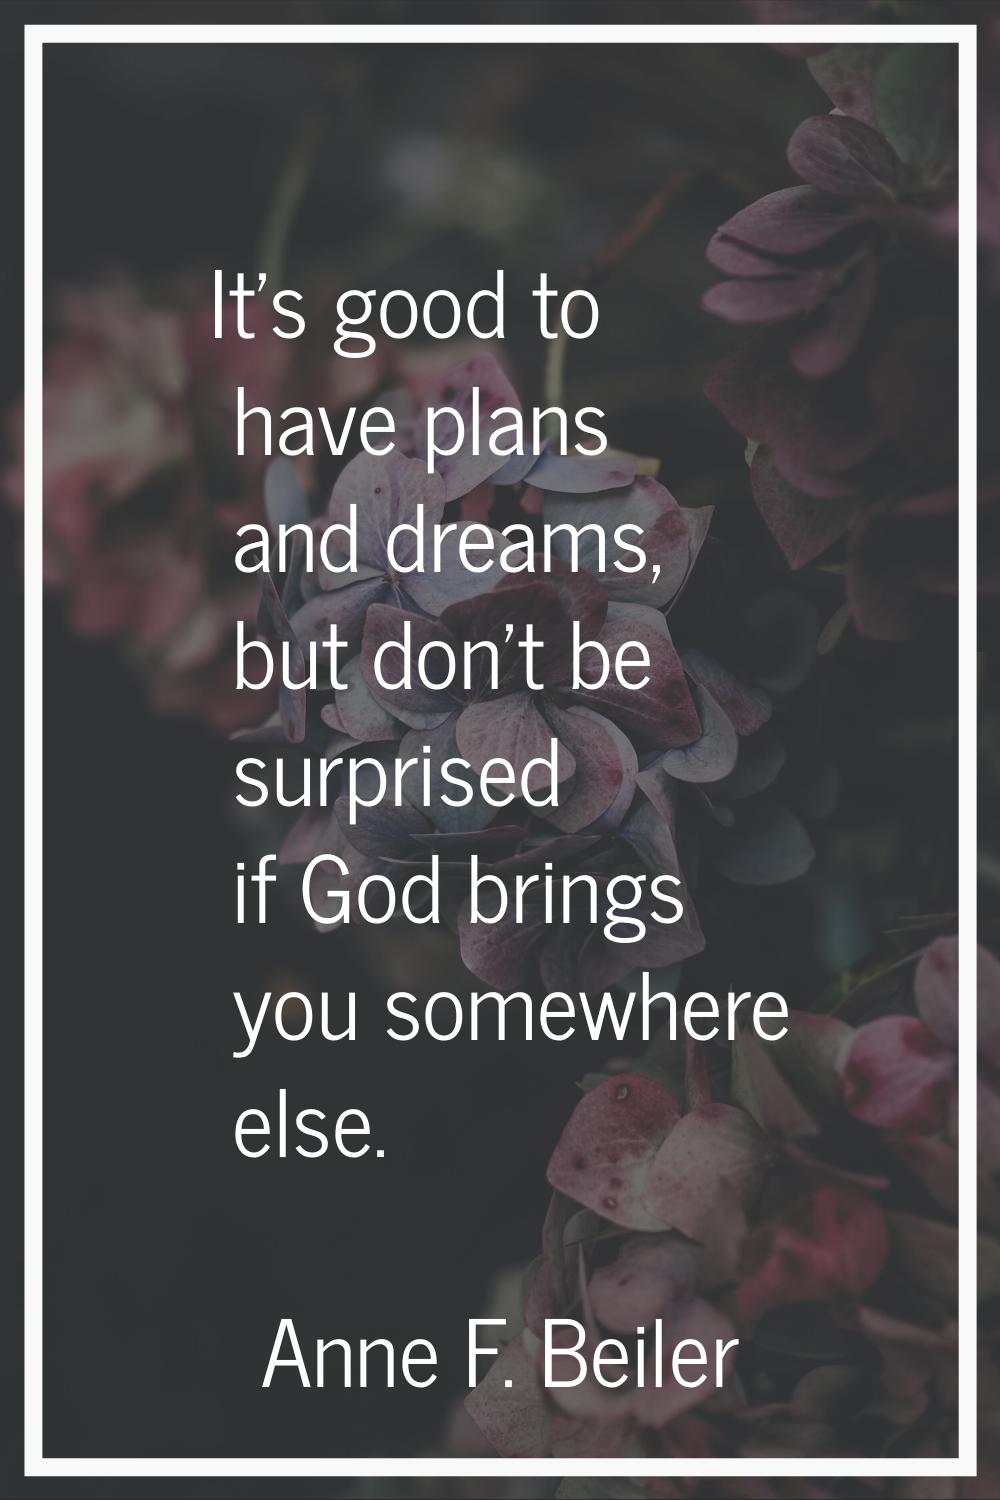 It's good to have plans and dreams, but don't be surprised if God brings you somewhere else.